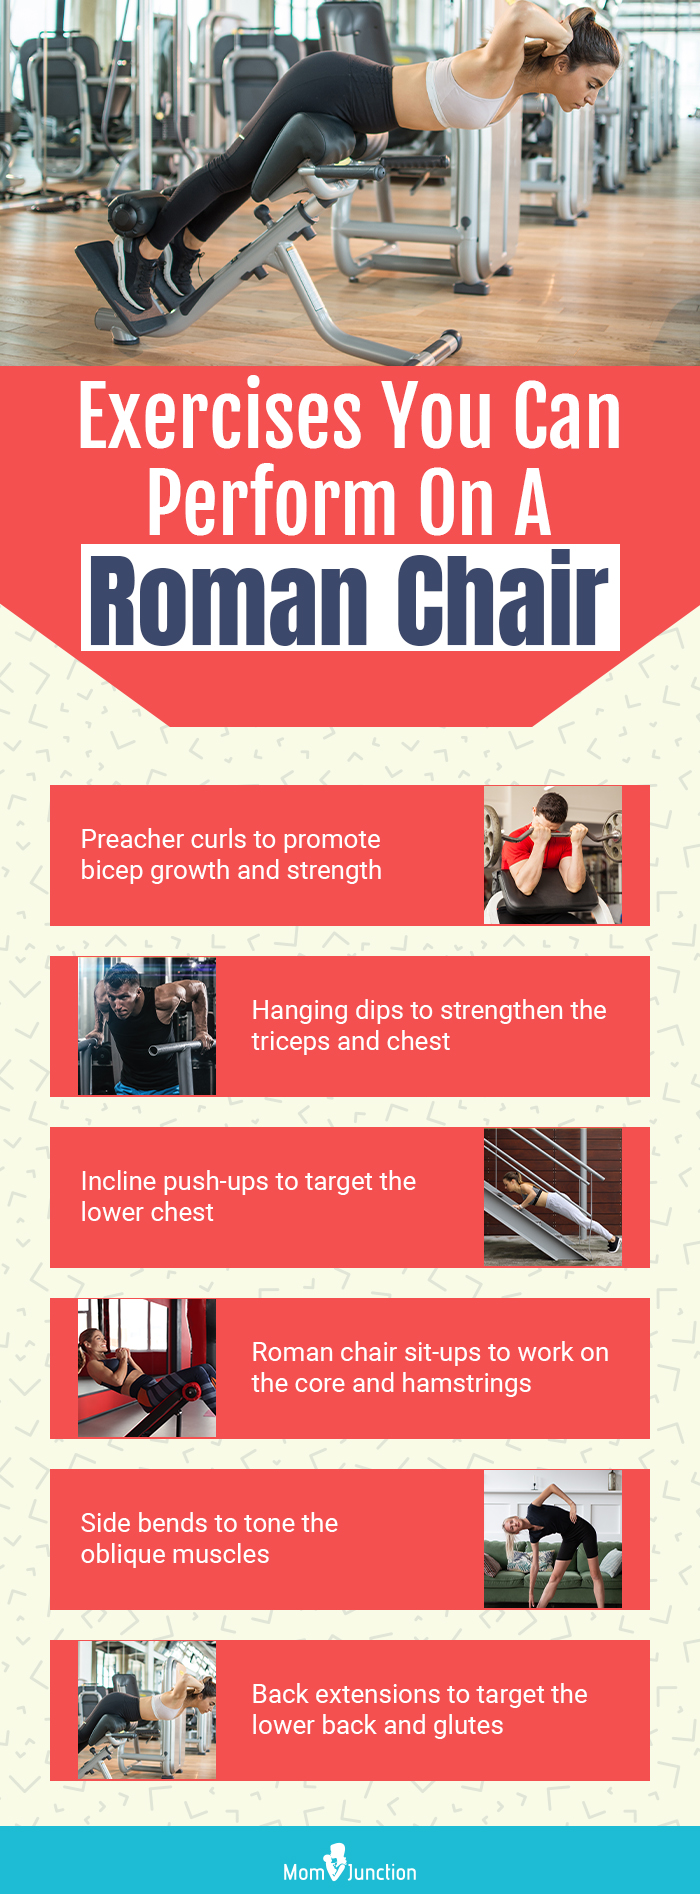 Exercises You Can Perform On A Roman Chair (infographic)